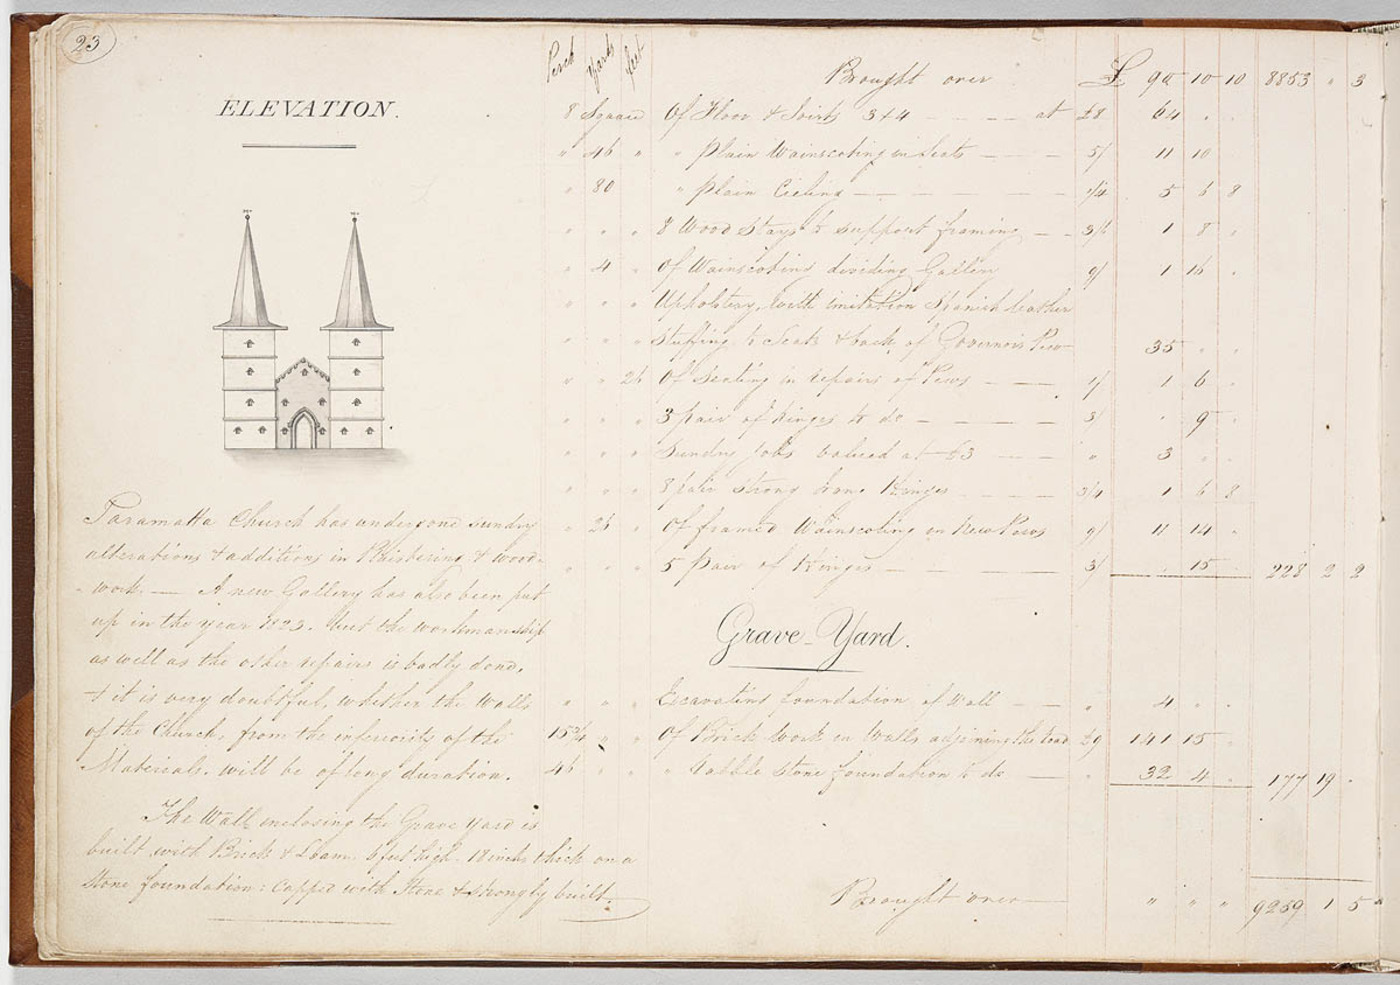 A hand-written report valuing the improvements to the Parramatta Church, featuring a sketch of the church labelled "ELEVATION".